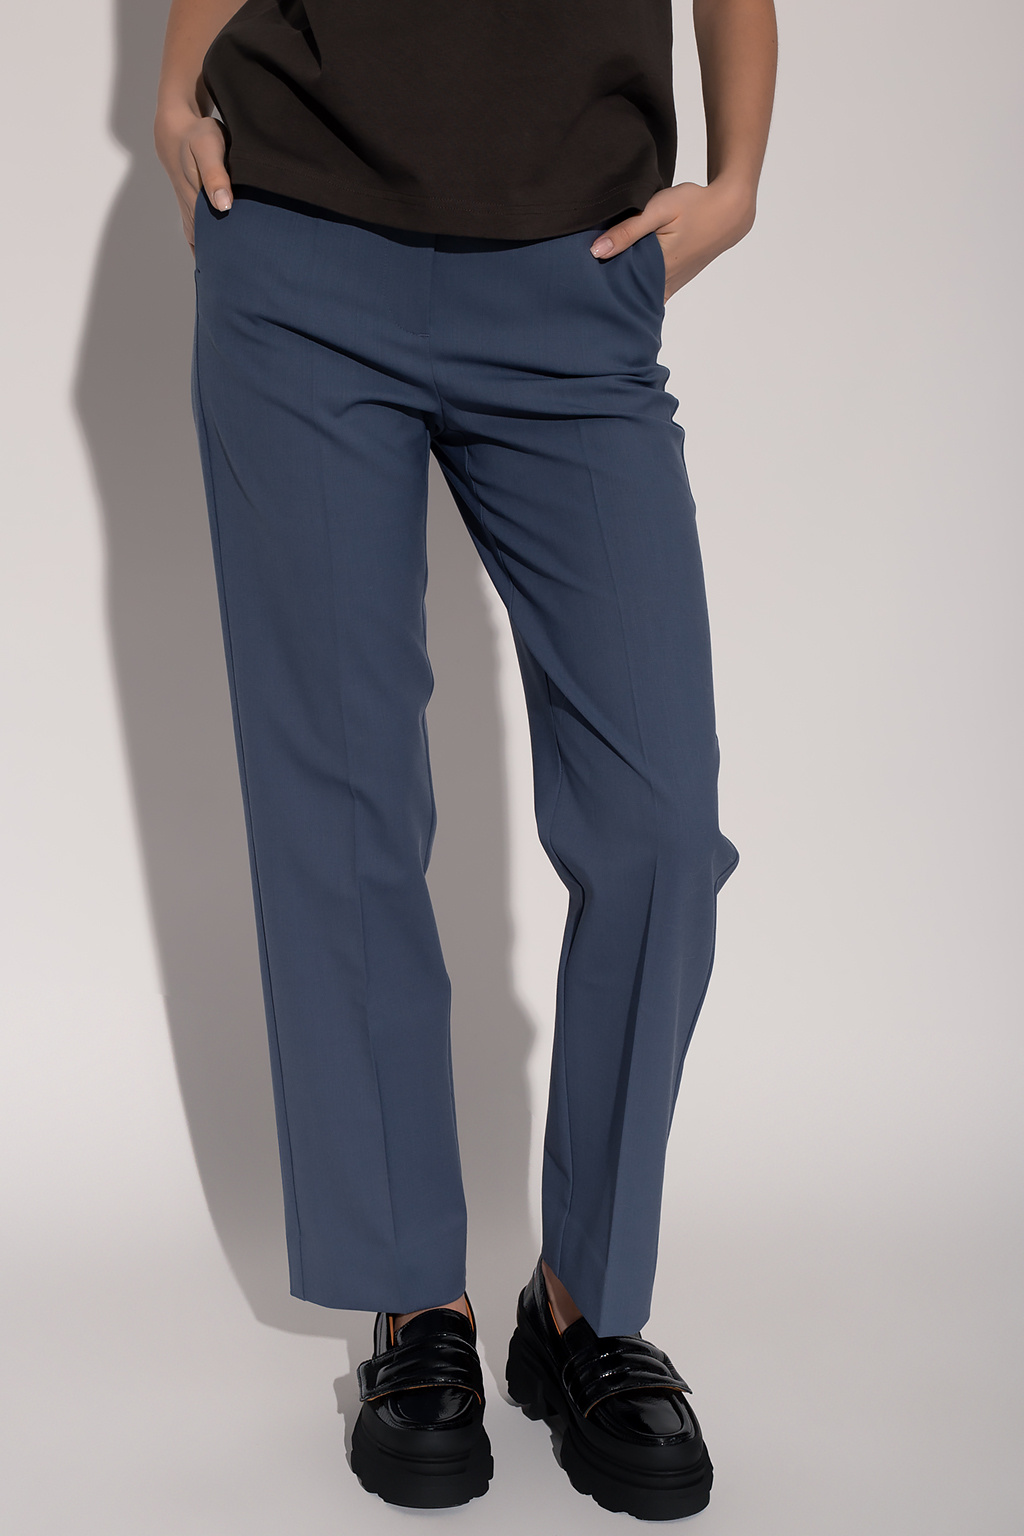 Holzweiler ‘Advise’ pleat-front Maxi trousers